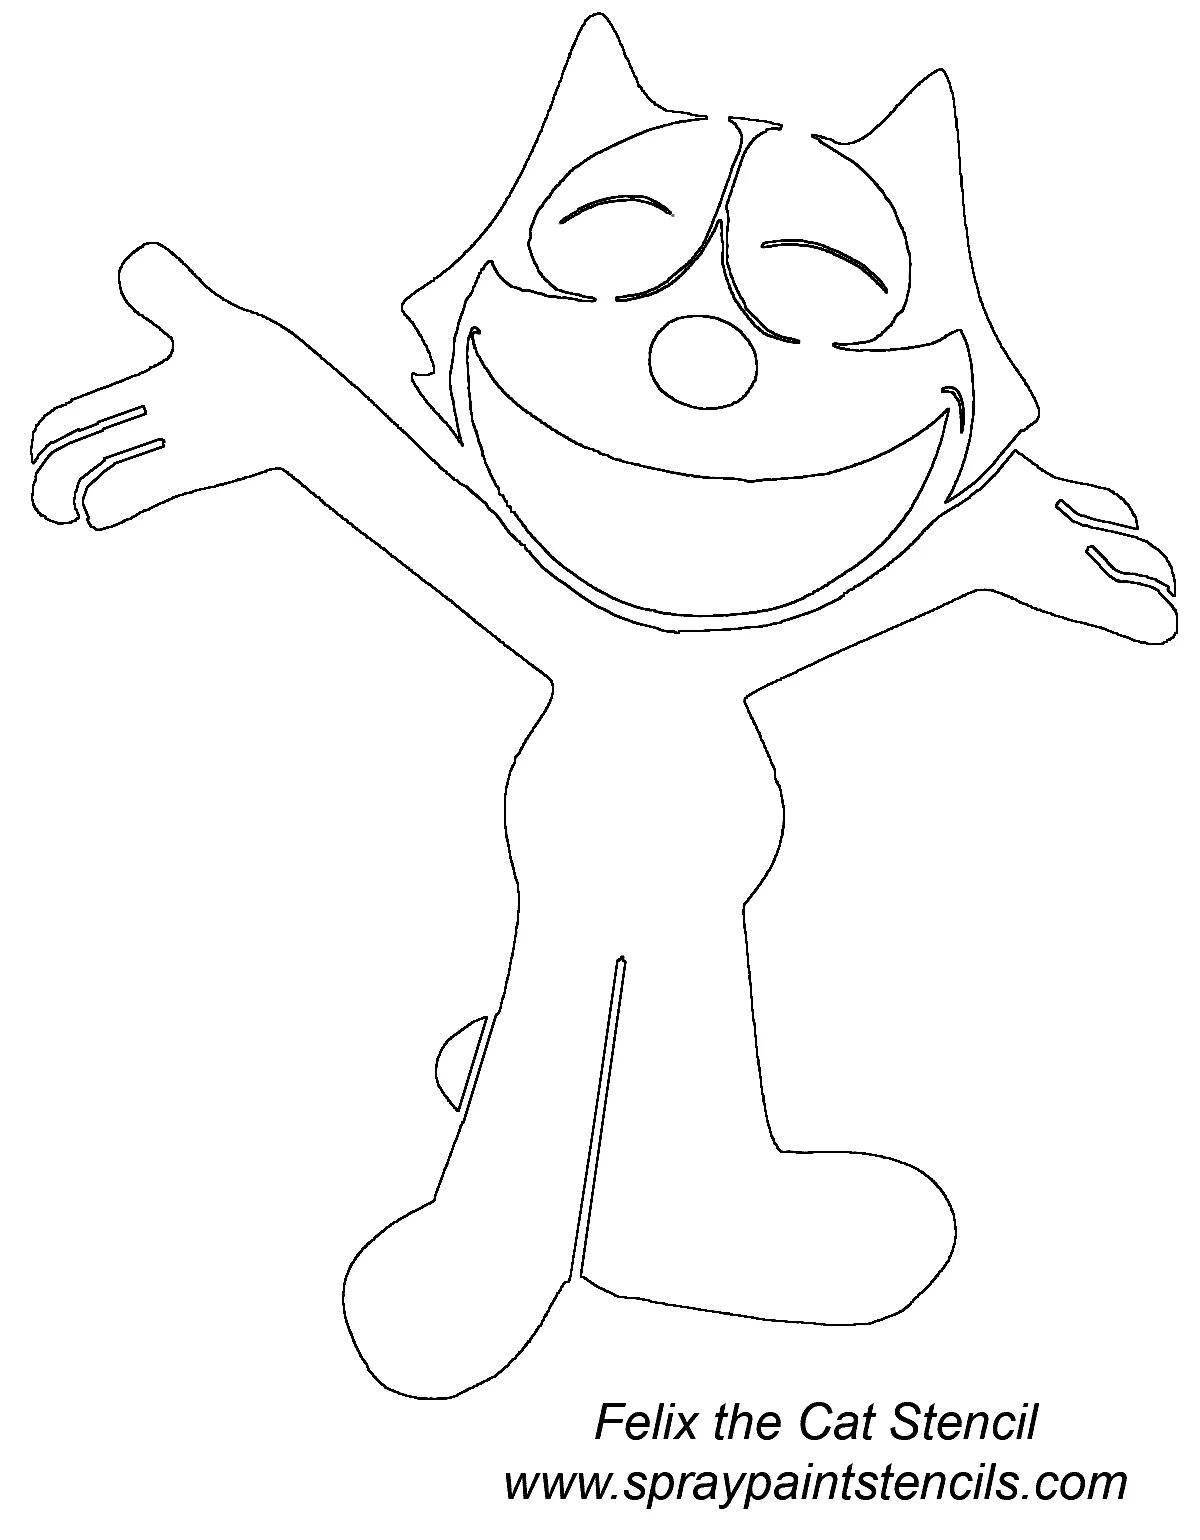 Felix the Cat Vibrant Coloring Page